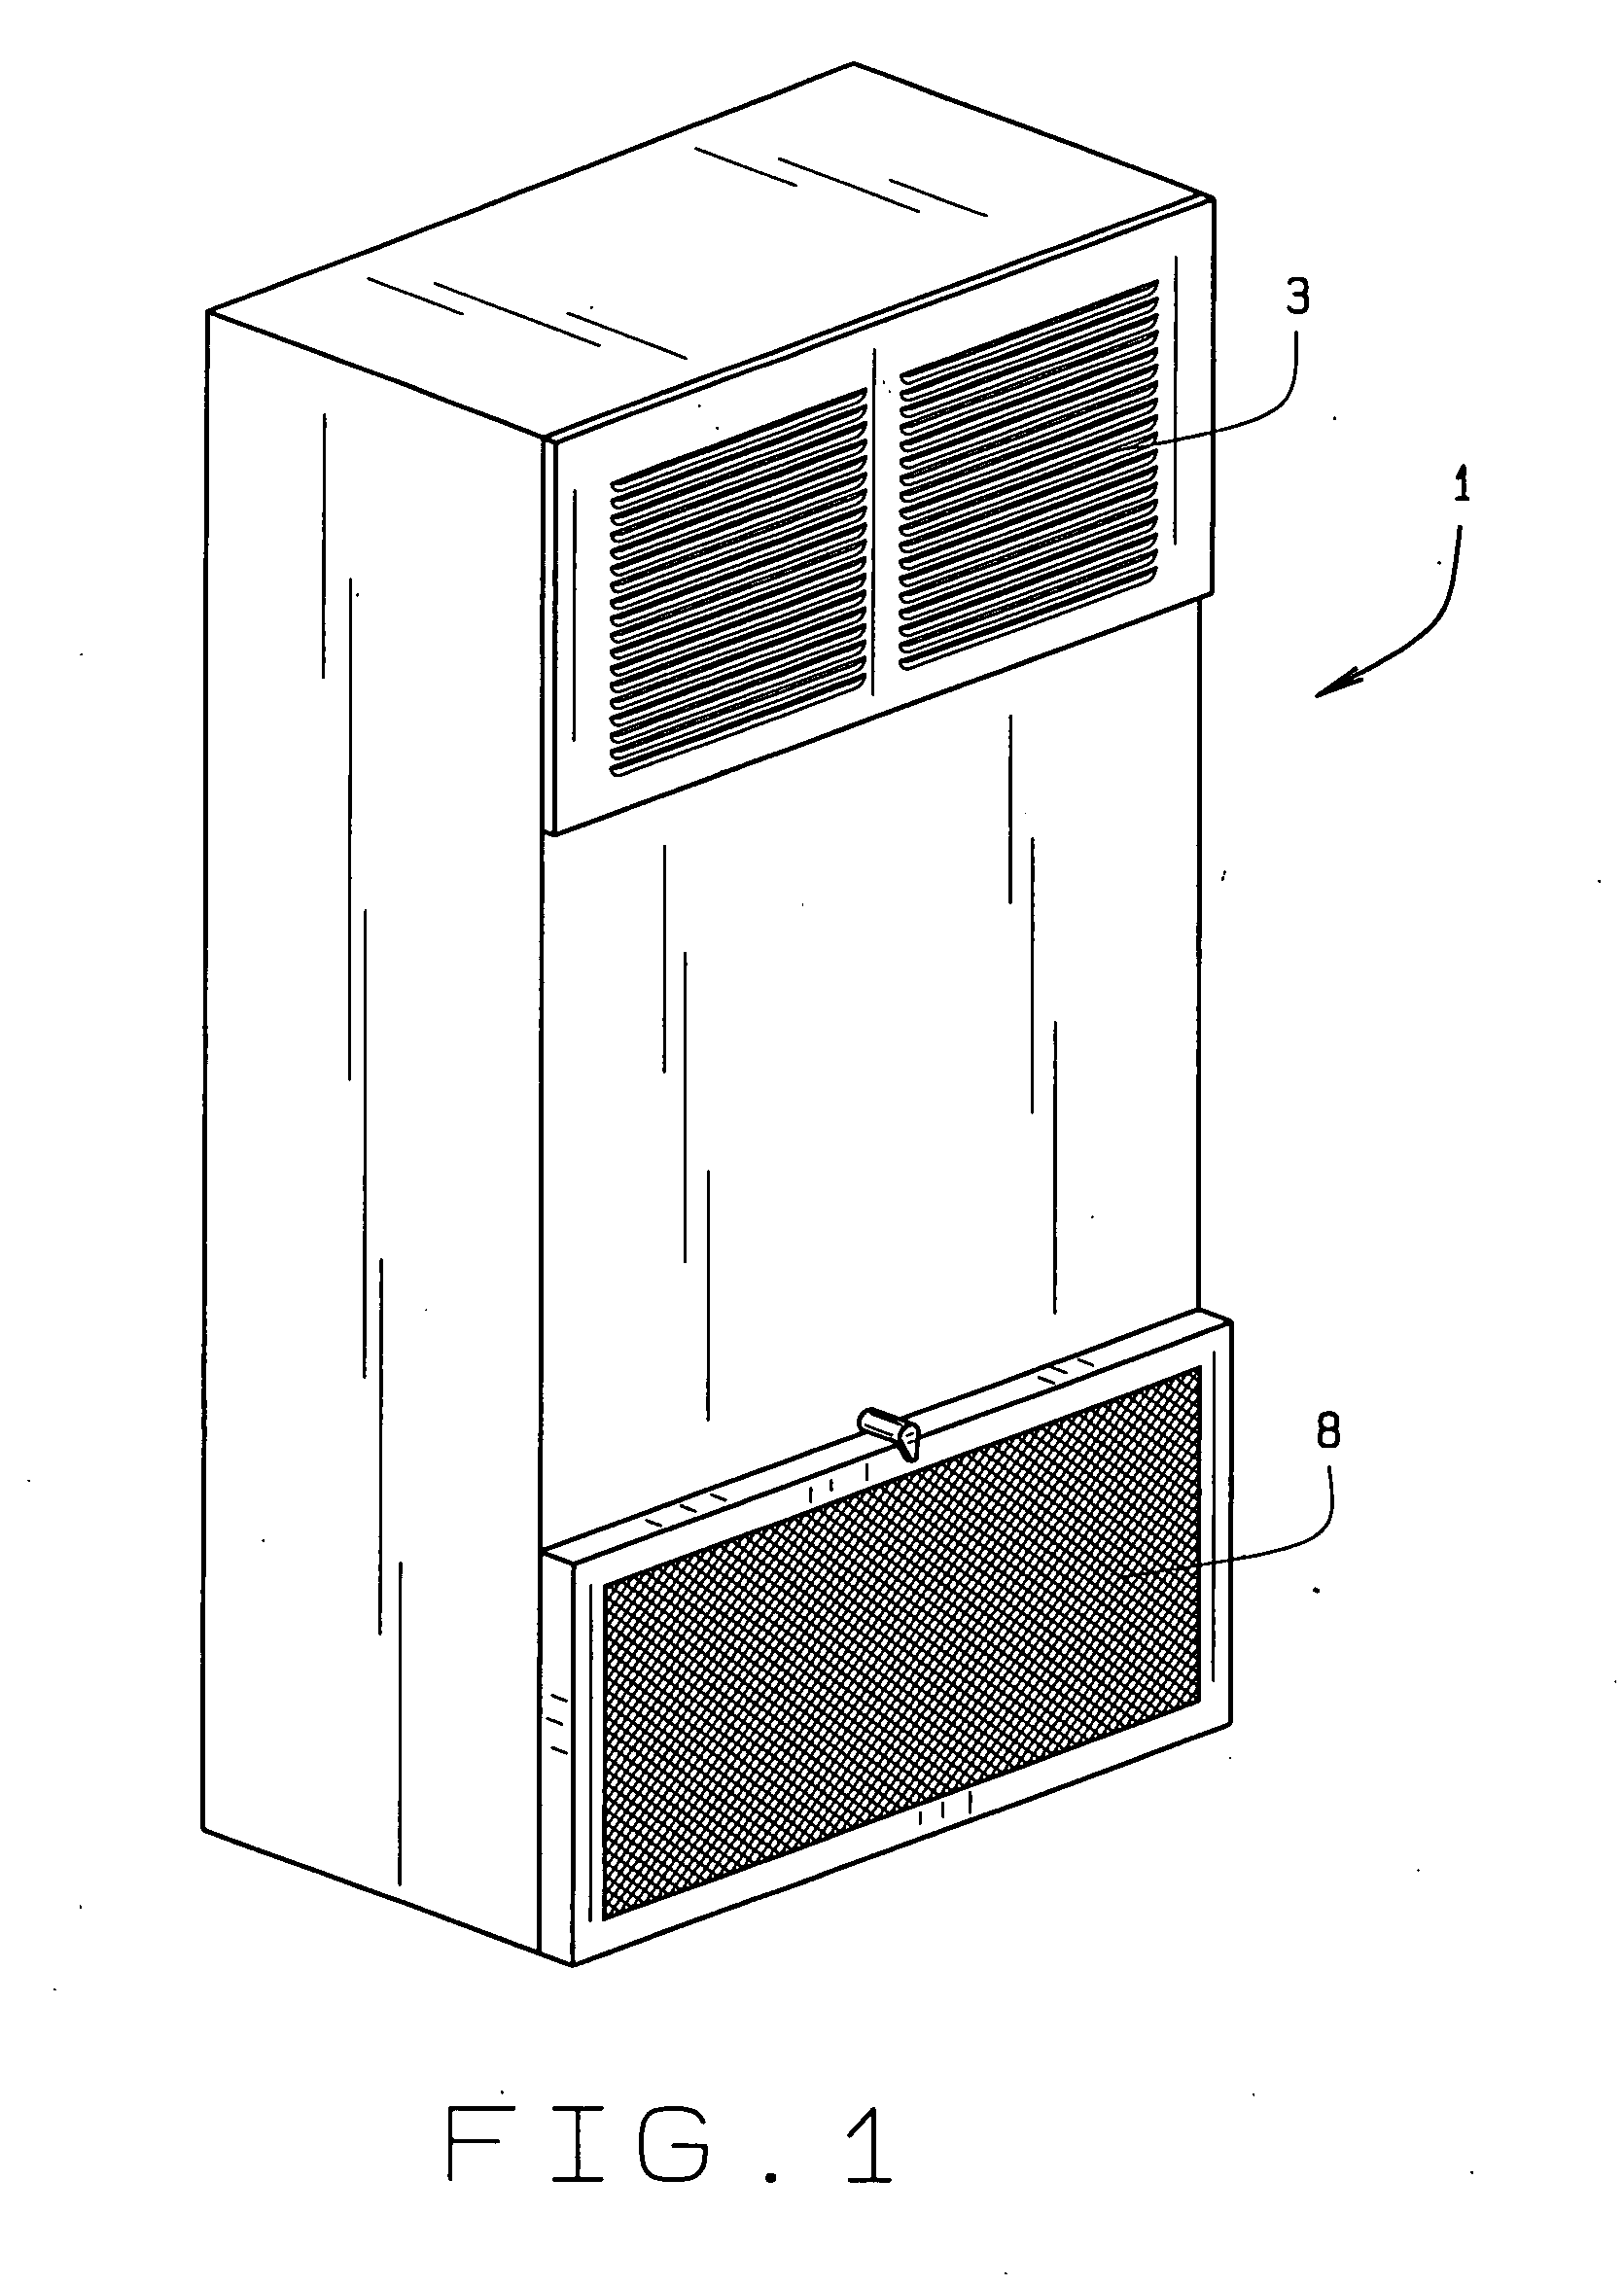 Air purification system and apparatus